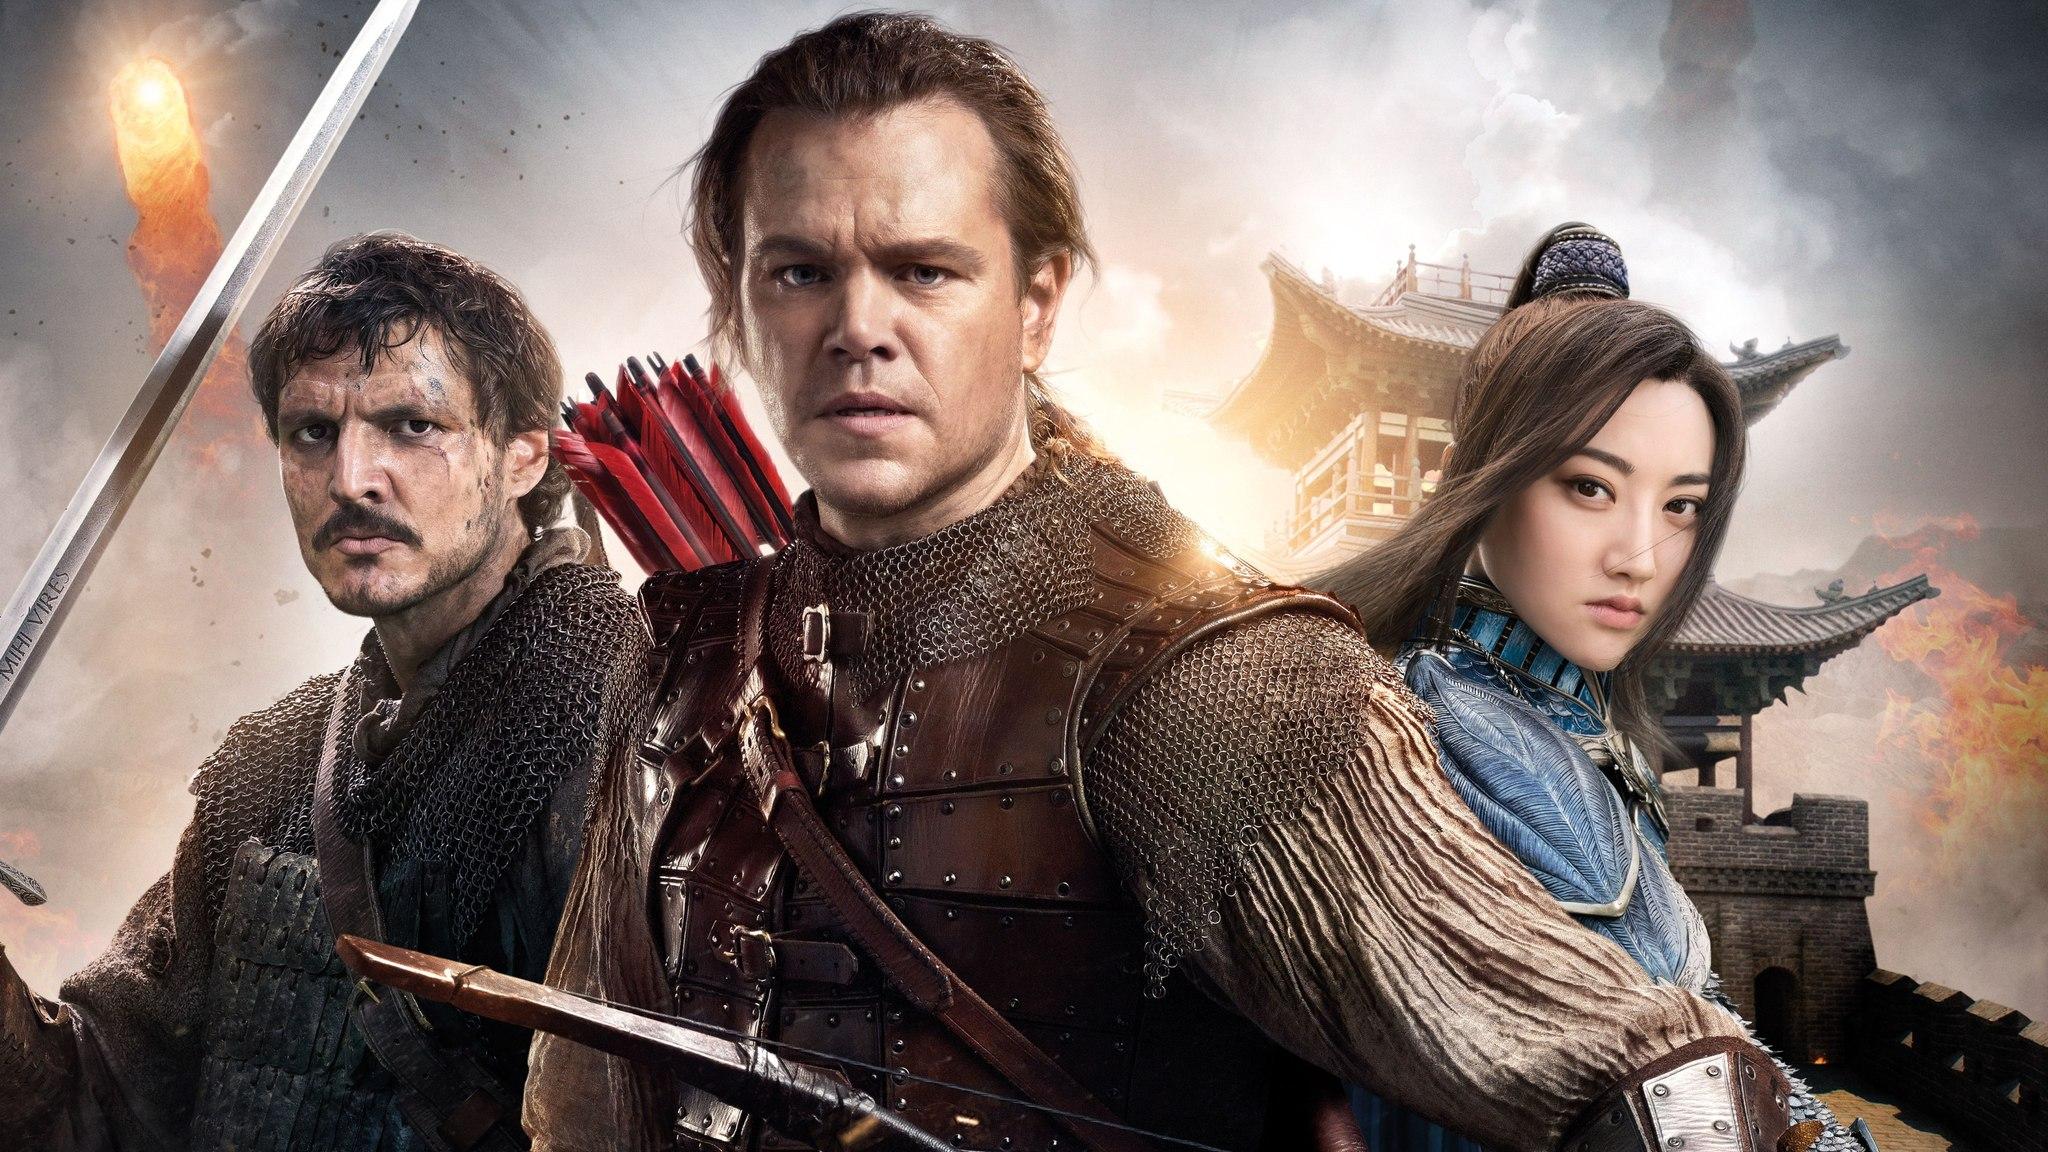 The Great Wall Matt Damon Film Set To Lose 75 Million Puts Future Of Us China Films In Doubt The Independent The Independent